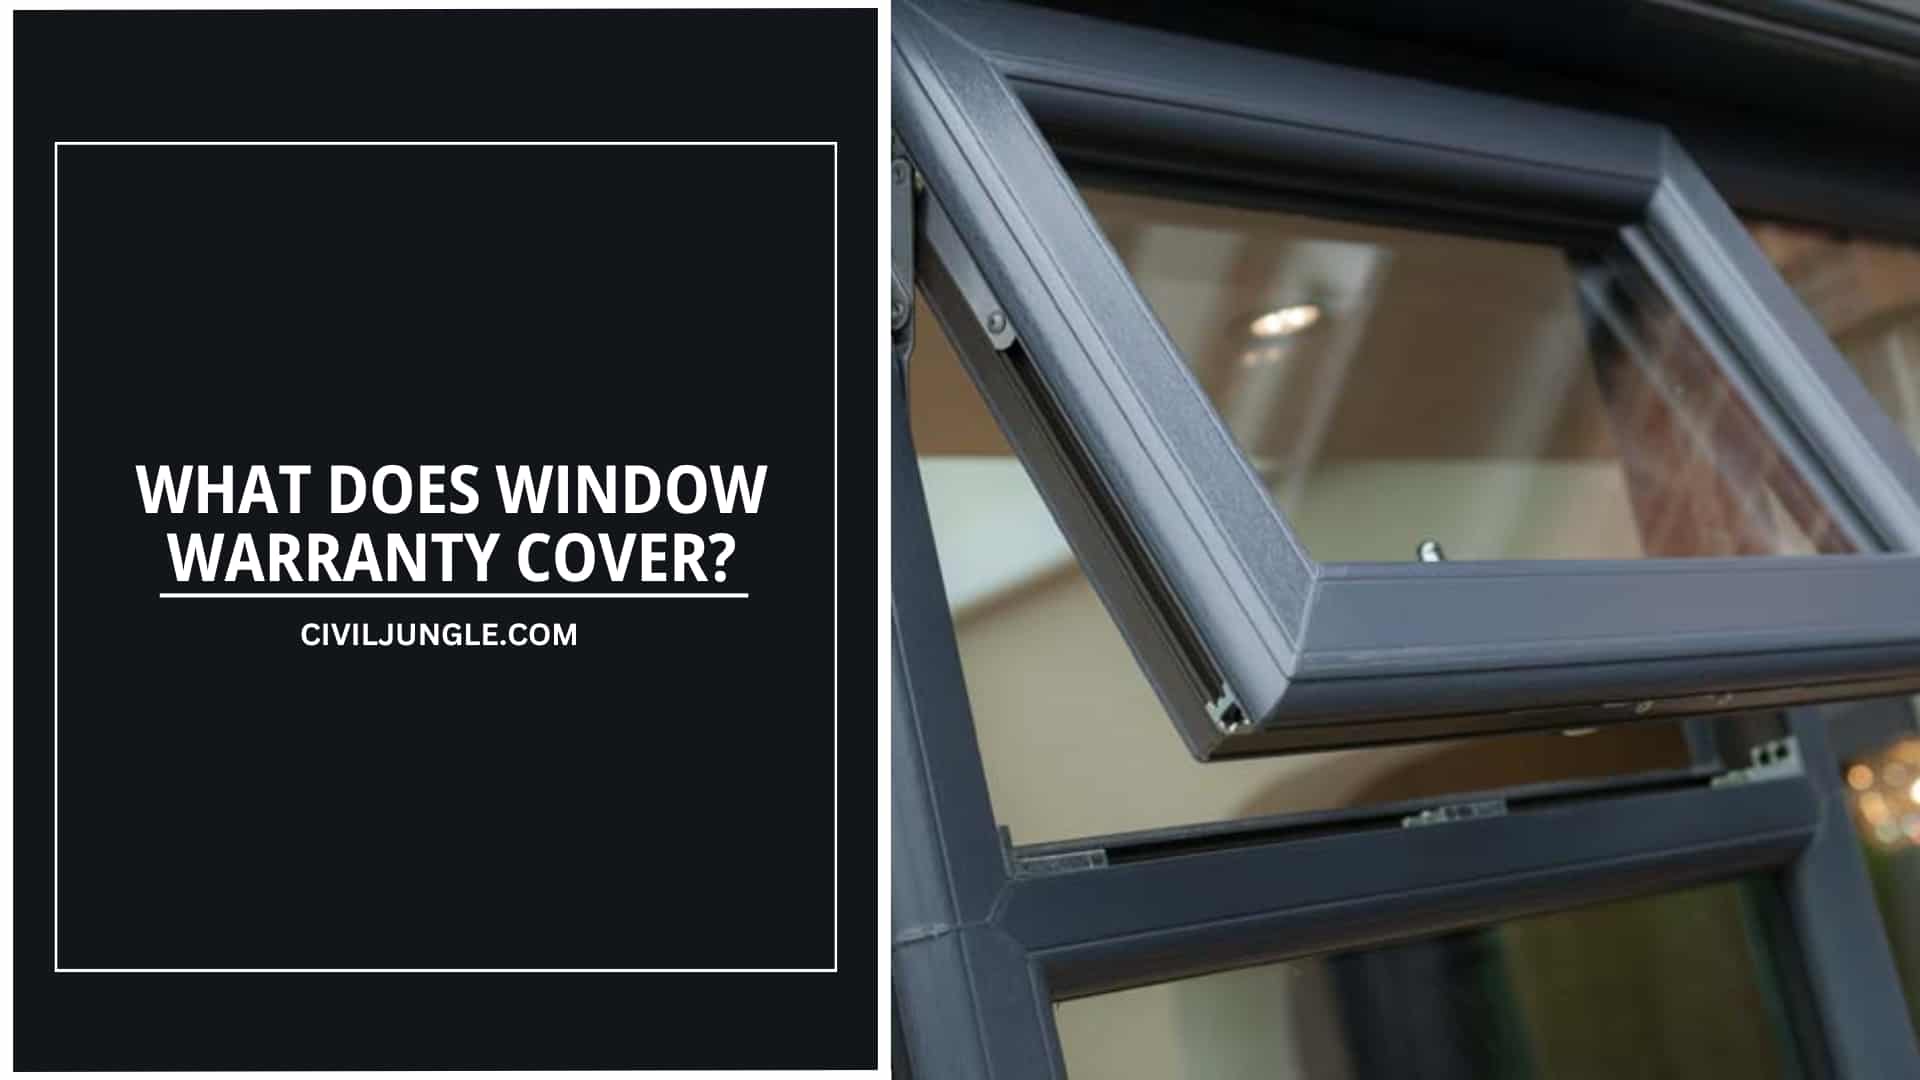 WHAT DOES WINDOW WARRANTY COVER?